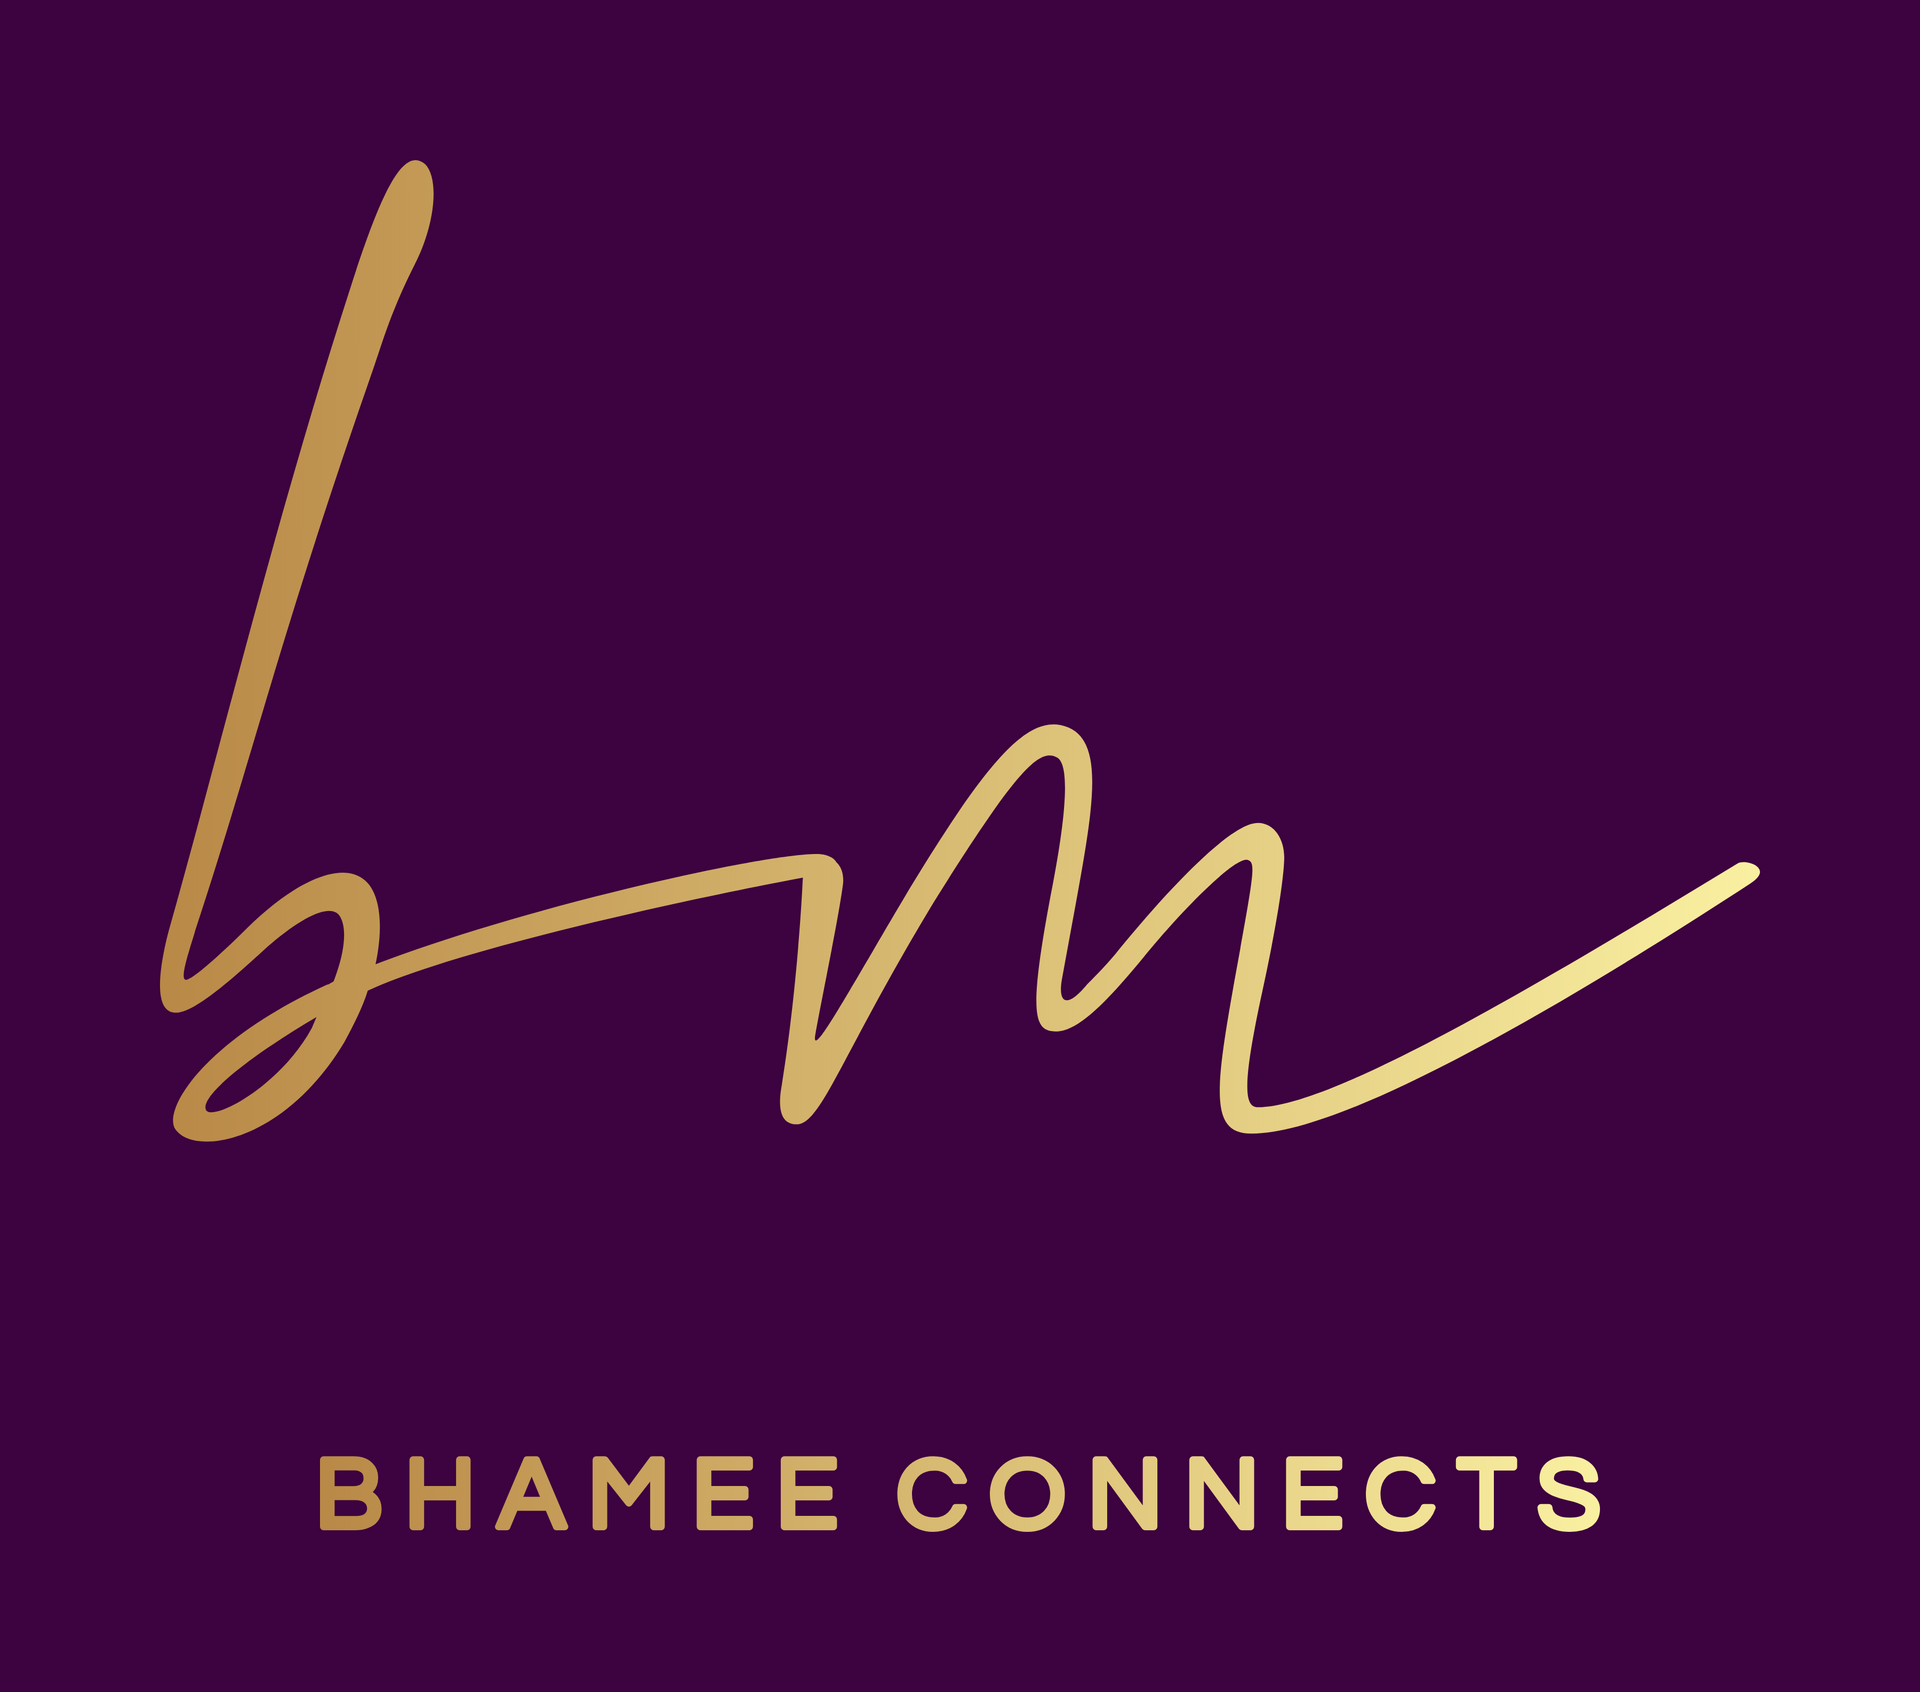 Bhmee Connects